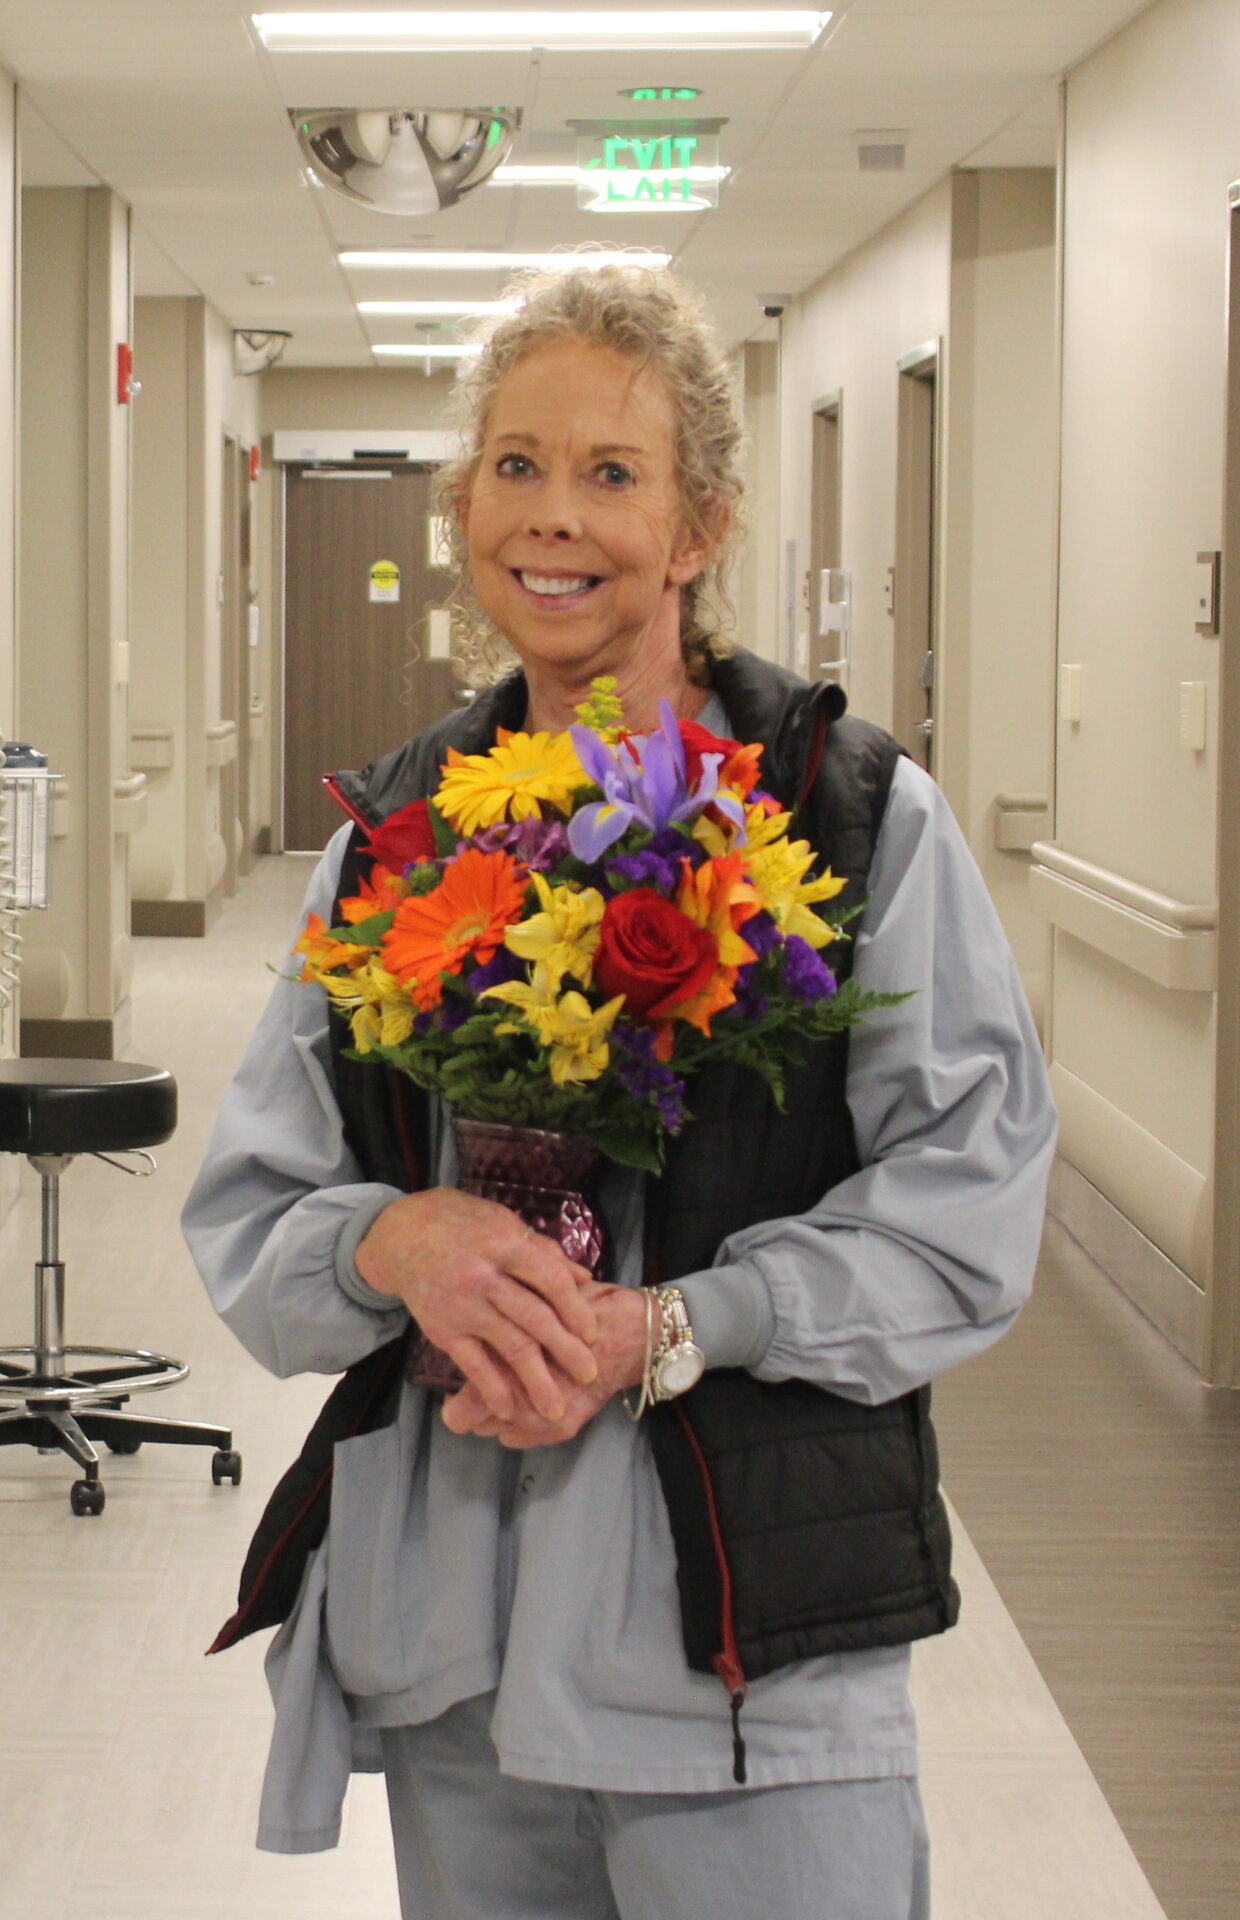 Linda is pictured standing holding her flowers after BEE celebration.